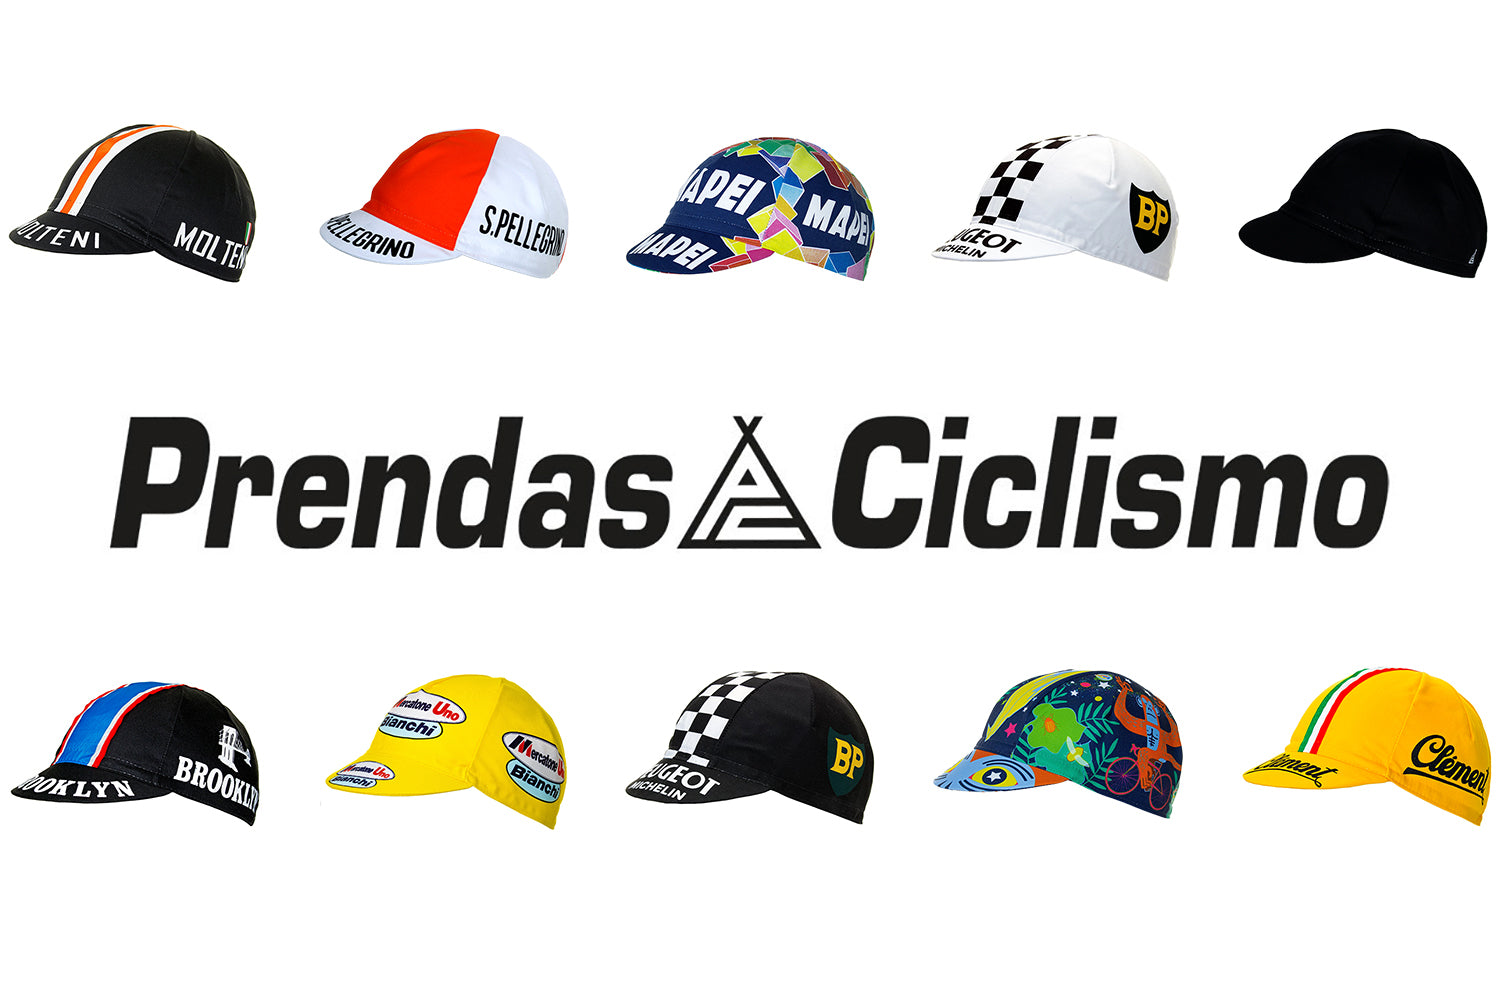 Read our blog on the best-selling cycling caps of the year!